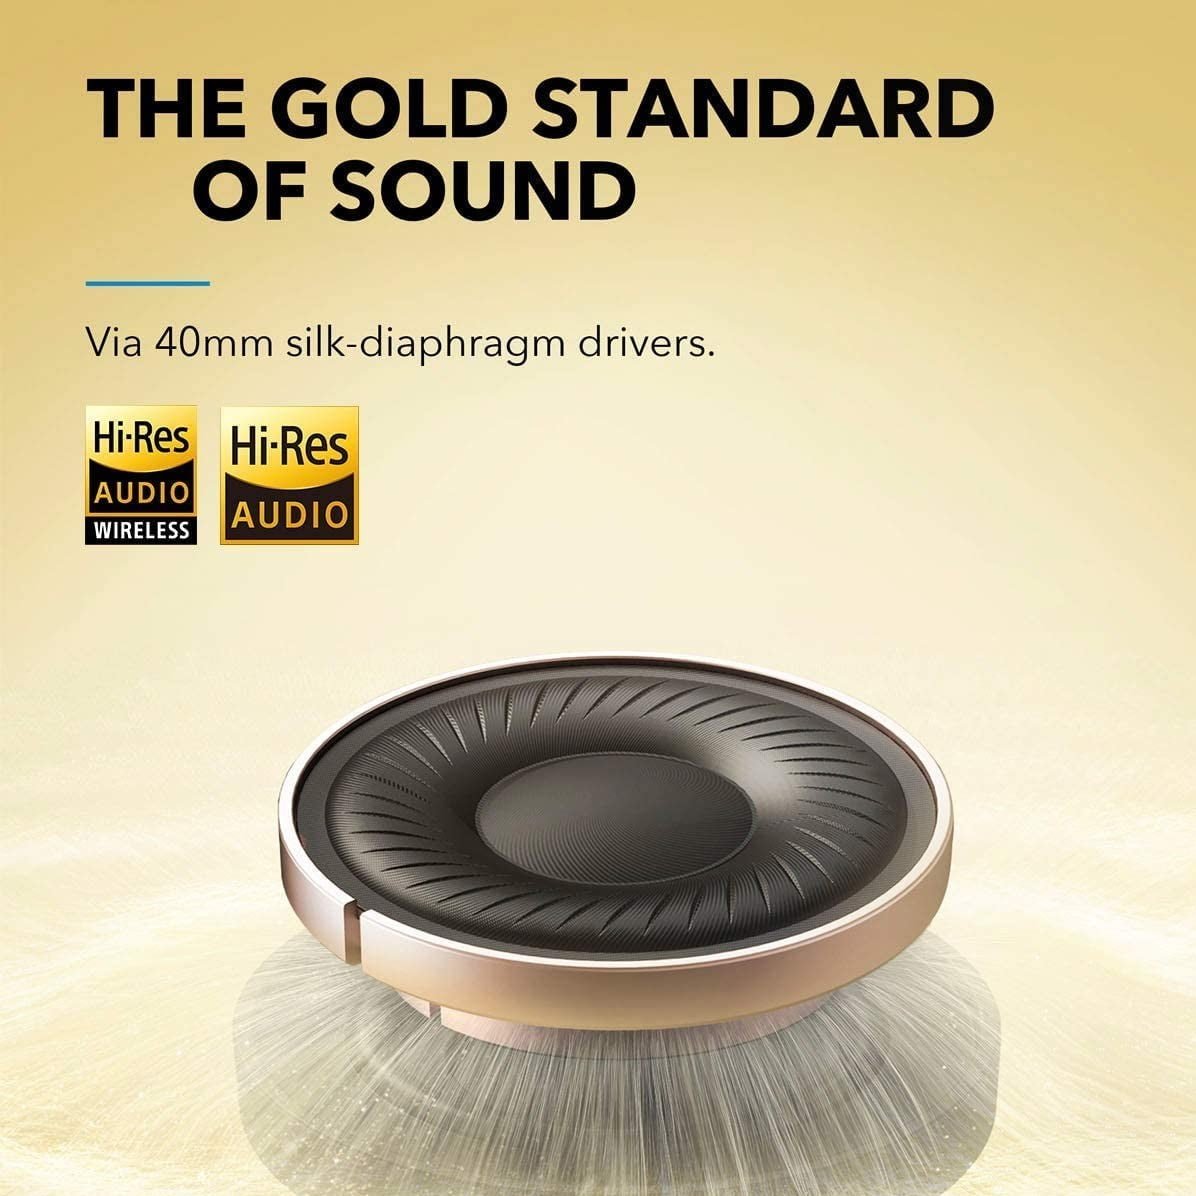 71Ruuztvgl. Ac Sl1500 Soundcore &Lt;H1&Gt;Anker Soundcore Life Q35&Lt;/H1&Gt; Https://Www.youtube.com/Watch?V=Fccvnxekawe &Lt;Ul Class=&Quot;A-Unordered-List A-Vertical A-Spacing-Mini&Quot;&Gt; &Lt;Li&Gt;&Lt;Span Class=&Quot;A-List-Item&Quot;&Gt;&Lt;Strong&Gt;Gold Standard Of Sound:&Lt;/Strong&Gt; Custom Silk-Diaphragm Drivers Accurately Reproduce Music Across A Wider Frequency Range And Cut Out Distortion To Deliver Sound That’s Both Hi-Res Audio And Hi-Res Audio Wireless Certified.&Lt;/Span&Gt;&Lt;/Li&Gt; &Lt;Li&Gt;&Lt;Span Class=&Quot;A-List-Item&Quot;&Gt;&Lt;Strong&Gt;Ldac Technology:&Lt;/Strong&Gt; 3 Times More Data Is Transmitted To Life Q35 Active Noise Cancelling Headphones Than Via Standard Bluetooth Codecs. This Lossless Transfer Ensures You Hear Every Tiny Detail In The Music.&Lt;/Span&Gt;&Lt;/Li&Gt; &Lt;Li&Gt;&Lt;Span Class=&Quot;A-List-Item&Quot;&Gt;&Lt;Strong&Gt;Multi-Mode Noise Cancelling:&Lt;/Strong&Gt; 2 Microphones On Each Earcup Detect And Filter Out Distracting Noises In Your Vicinity. Switch Between Transport, Outdoor, And Indoor Modes For A Tailored Noise Cancelling Experience.&Lt;/Span&Gt;&Lt;/Li&Gt; &Lt;Li&Gt;&Lt;Span Class=&Quot;A-List-Item&Quot;&Gt;&Lt;Strong&Gt;Comfortable And Convenient:&Lt;/Strong&Gt; Life Q35 Active Noise Cancelling Headphones Can Be Worn All Day Thanks To Their Lightweight Build And Memory Foam Padded Earcups And Headband. A Built-In Sensor Detects When They’re Removed From Your Ears And Instantly Pauses The Audio.&Lt;/Span&Gt;&Lt;/Li&Gt; &Lt;Li&Gt;&Lt;Span Class=&Quot;A-List-Item&Quot;&Gt;&Lt;Strong&Gt;Ai-Enhanced Calls:&Lt;/Strong&Gt; The Beamforming Microphones On Life Q35 Active Noise Cancelling Headphones Pick Up Your Voice With Incredible Accuracy By Using An Ai Algorithm That’s Been Tested Thousands Of Times. Calls Sound Crisp, Clear, And Free Of Unwanted Noise.&Lt;/Span&Gt;&Lt;/Li&Gt; &Lt;/Ul&Gt; &Lt;H5&Gt;Warranty: Anker Product Warranty&Lt;/H5&Gt; &Lt;Pre&Gt;&Lt;B&Gt;We Also Provide International Wholesale And Retail Shipping To All Gcc Countries: Saudi Arabia, Qatar, Oman, Kuwait, Bahrain.&Lt;/B&Gt;&Lt;/Pre&Gt; Headphones Anker Soundcore Life Q35 Headphones - Blue